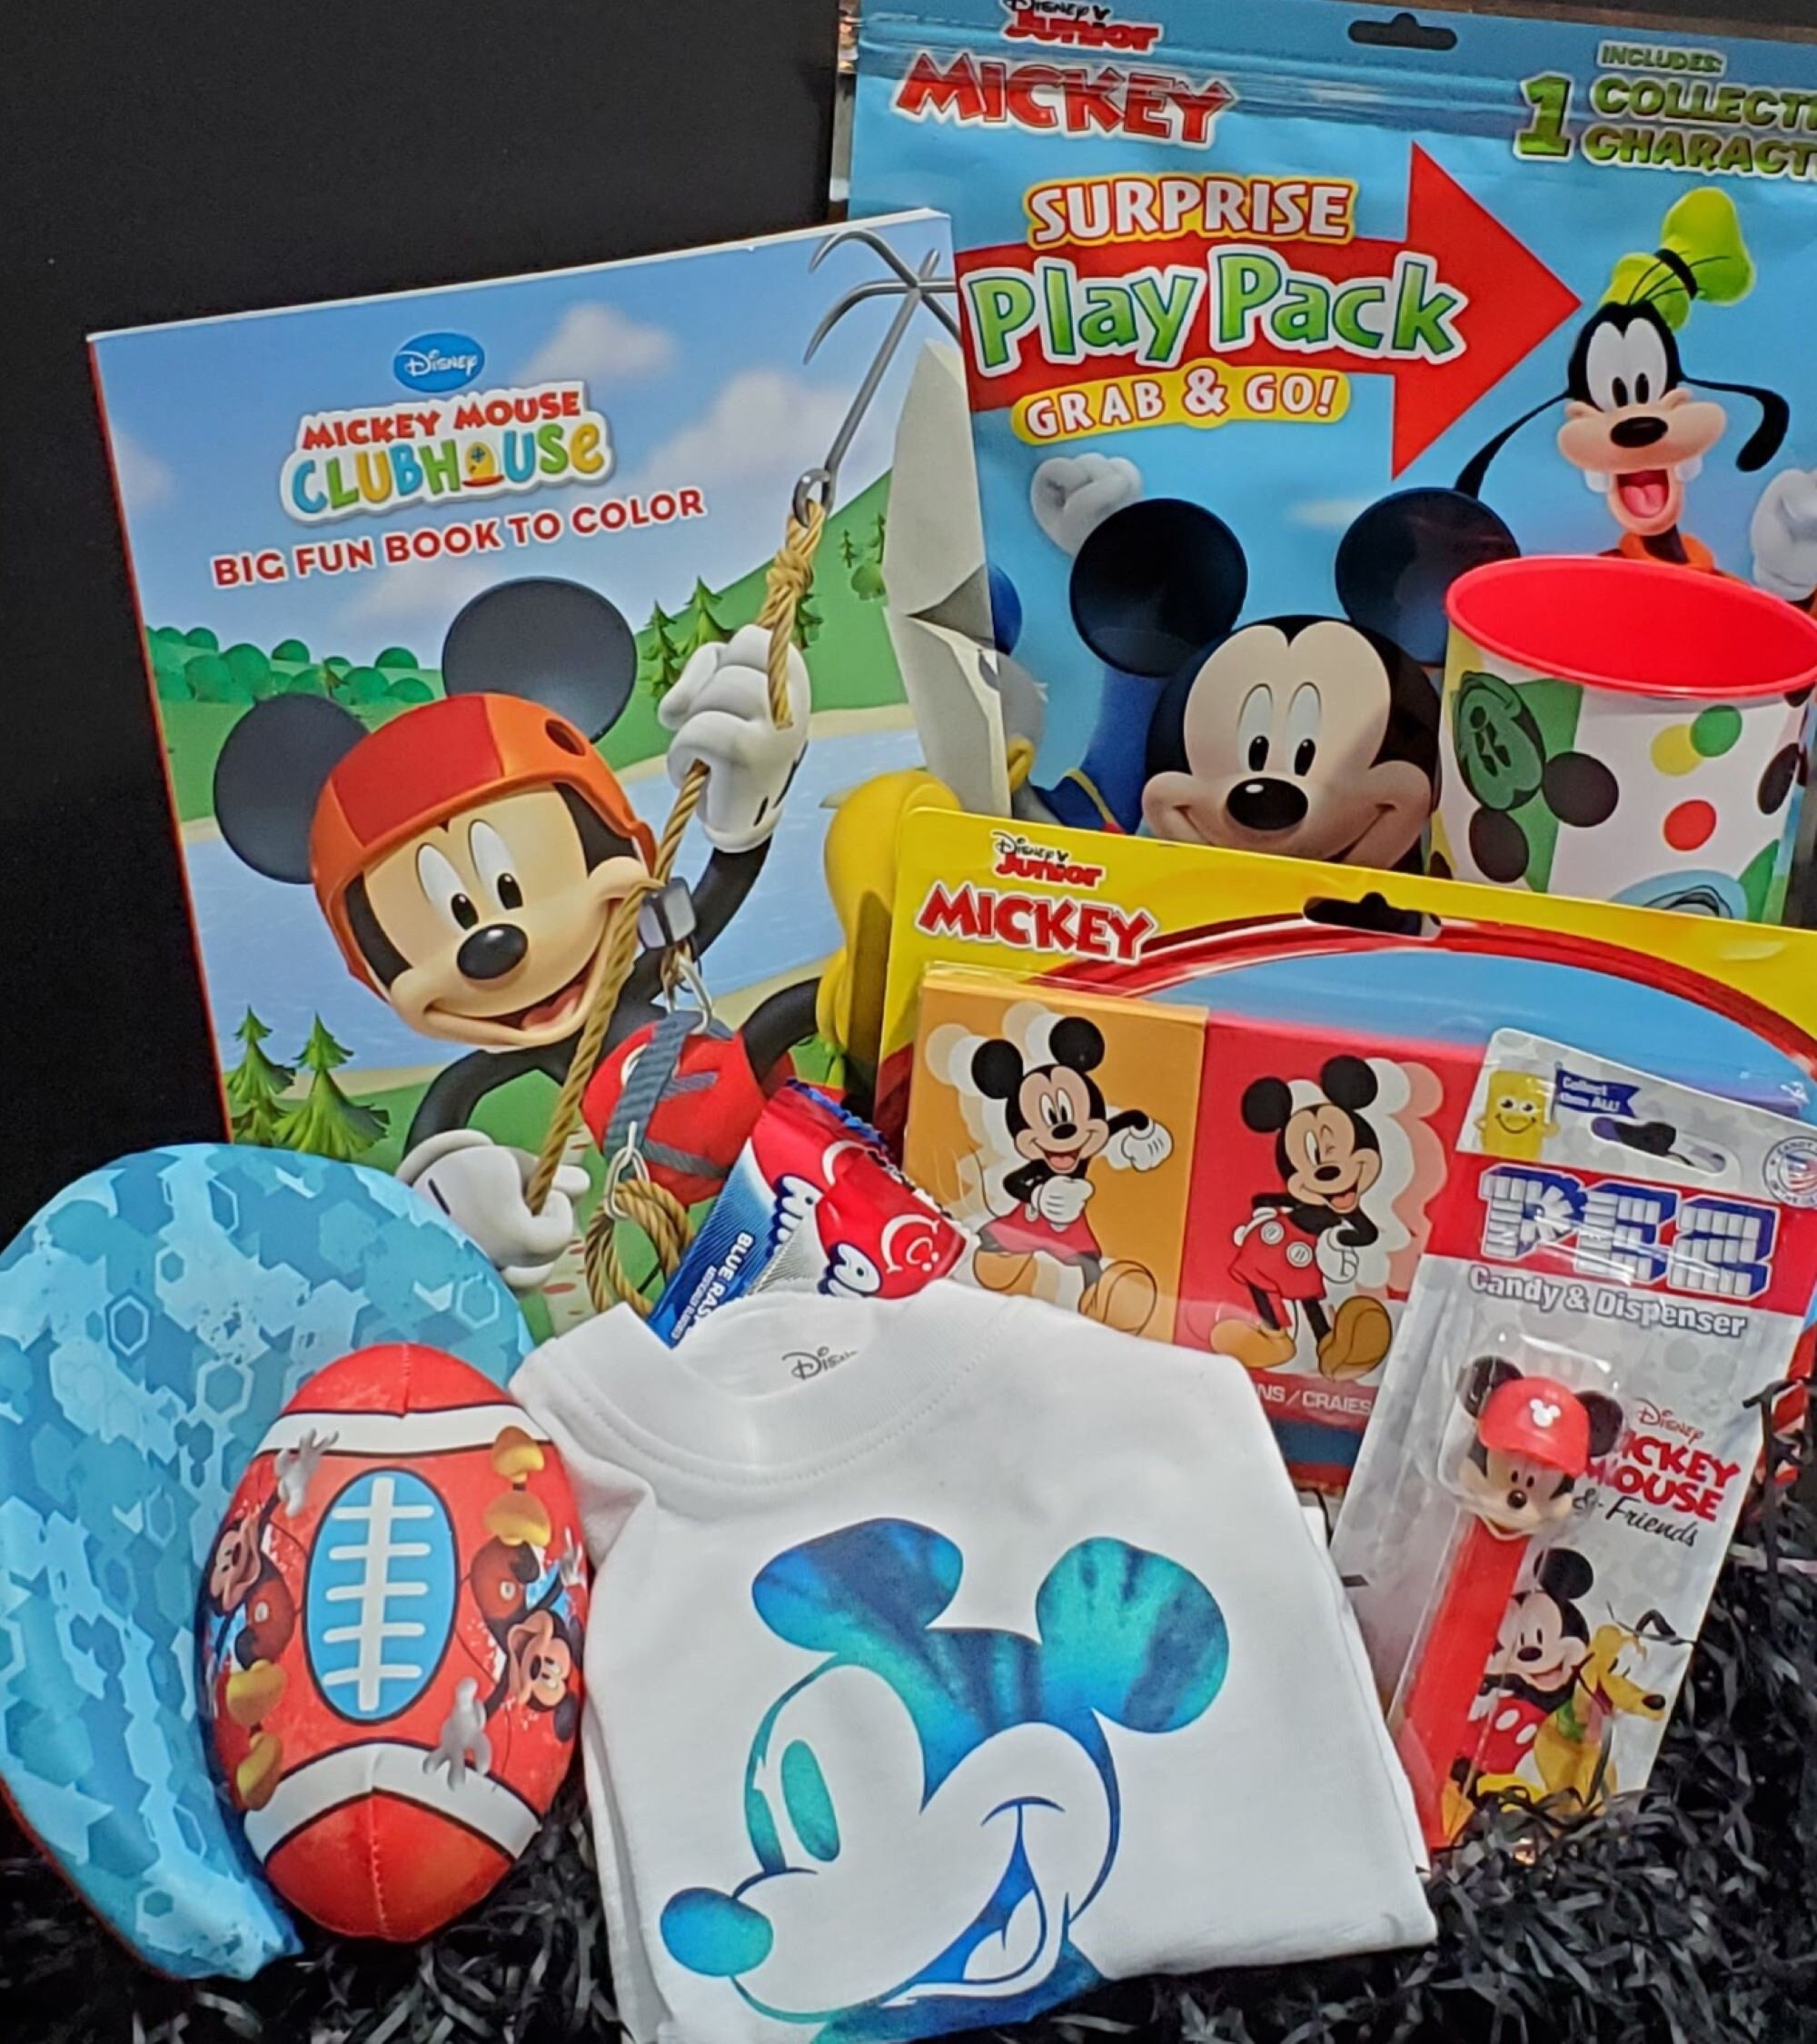 Mickey SURPRISE Play Pack Grab & Go!